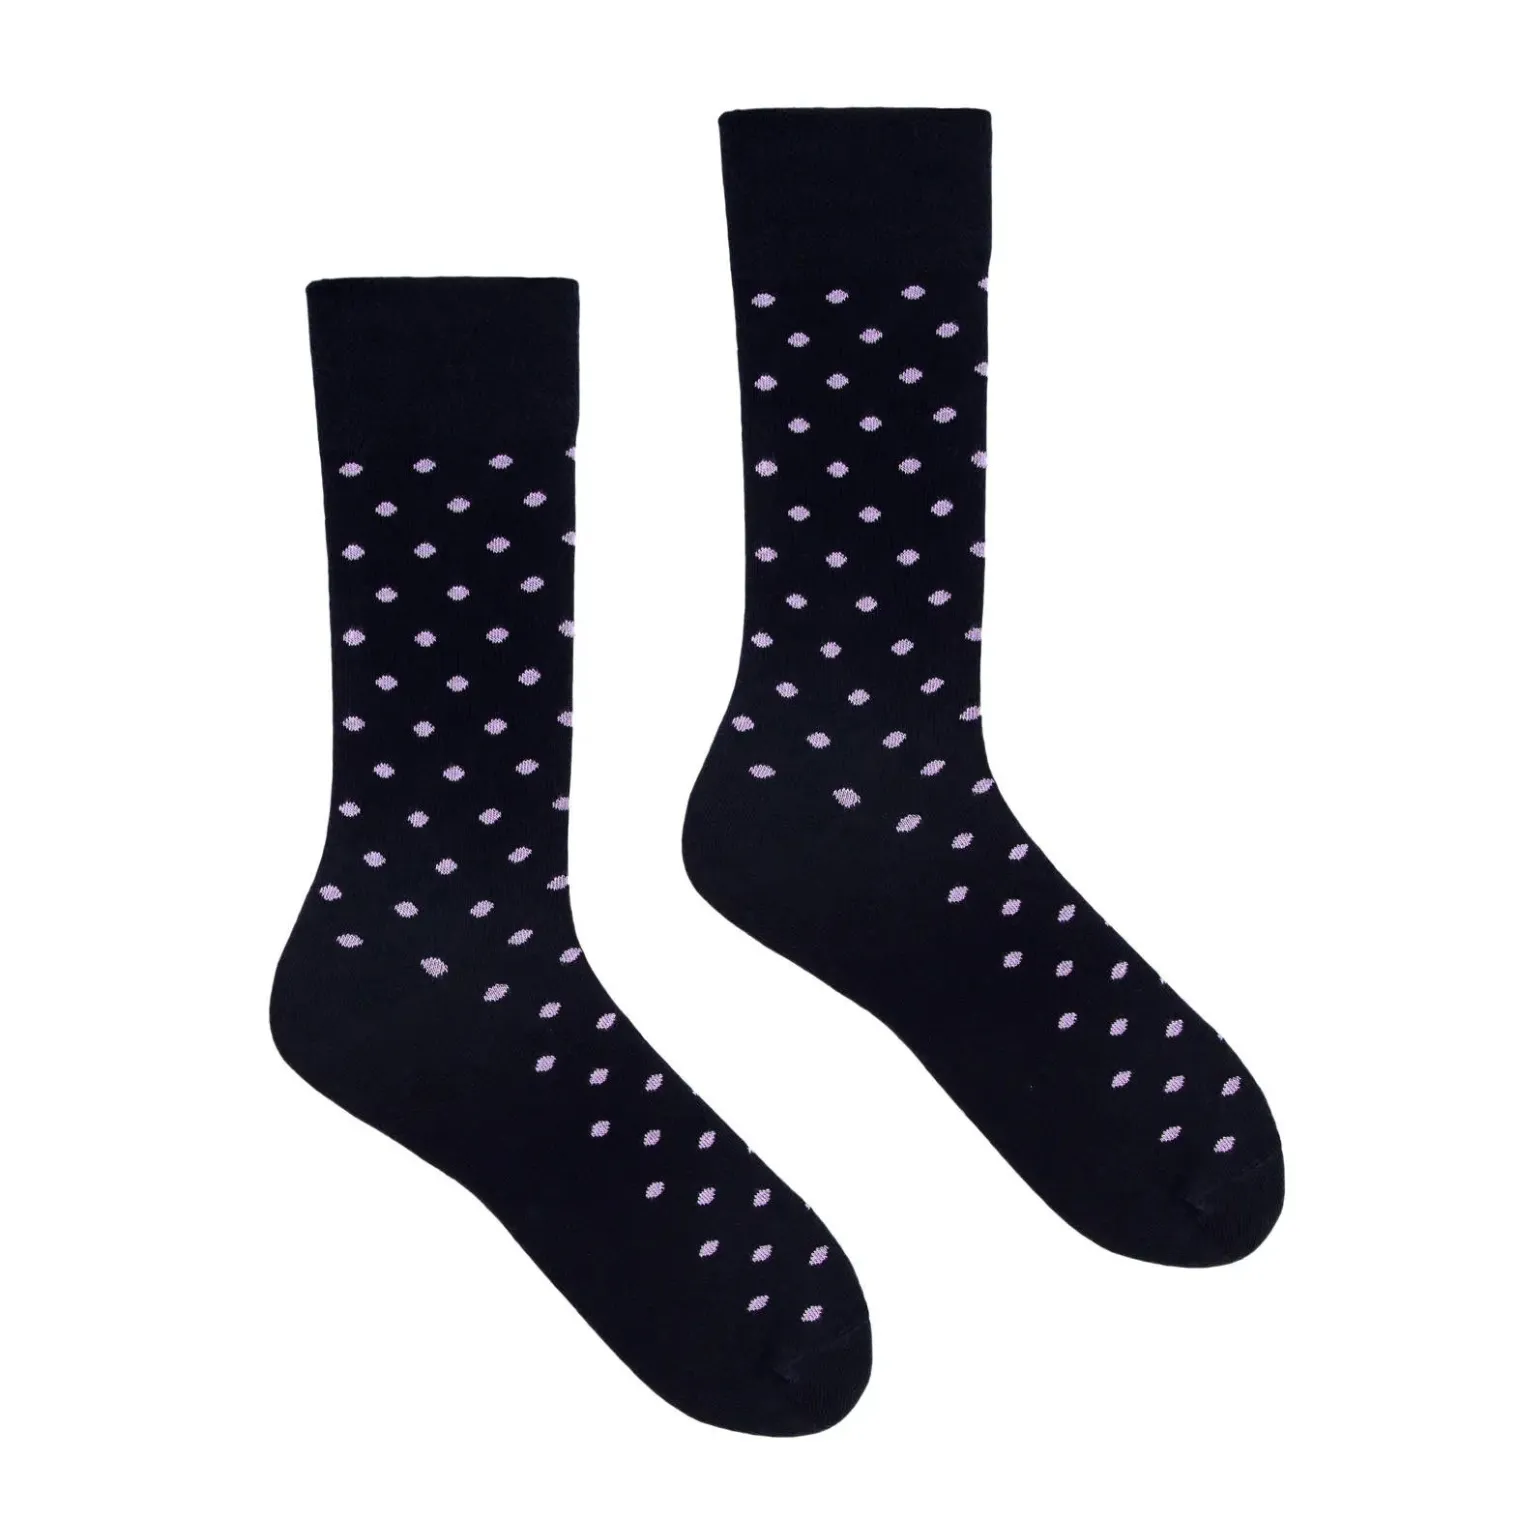 Dress Socks manufacturing with recycled